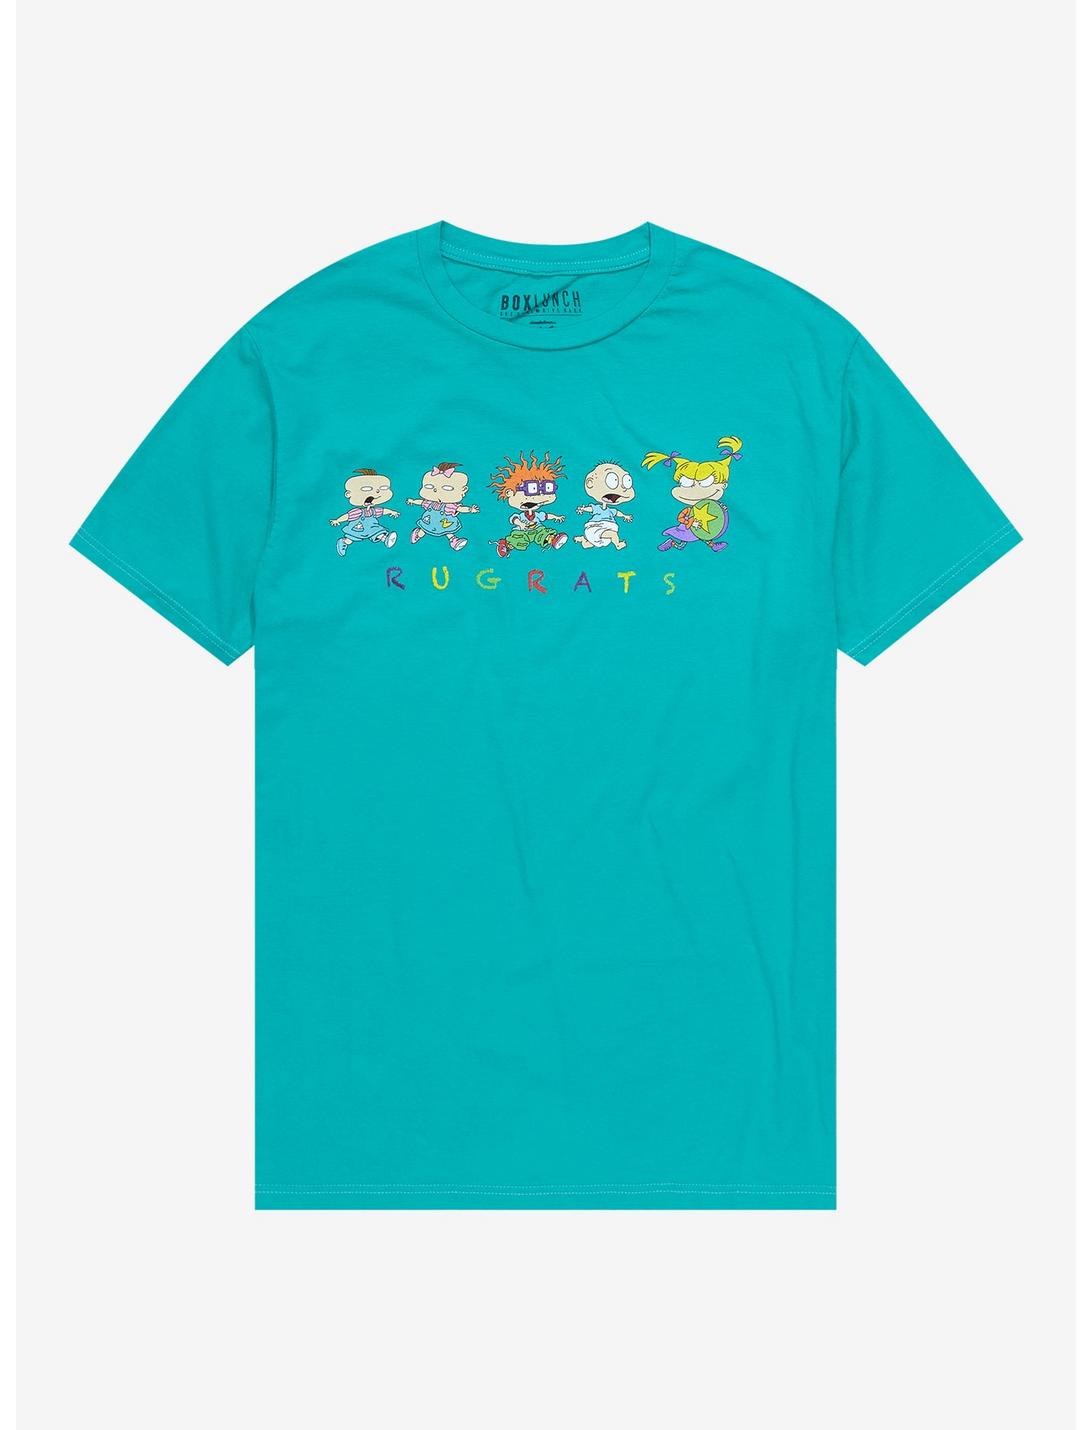 Nickelodeon Rugrats Group Running T-Shirt - BoxLunch Exclusive, LIGHT GREEN, hi-res